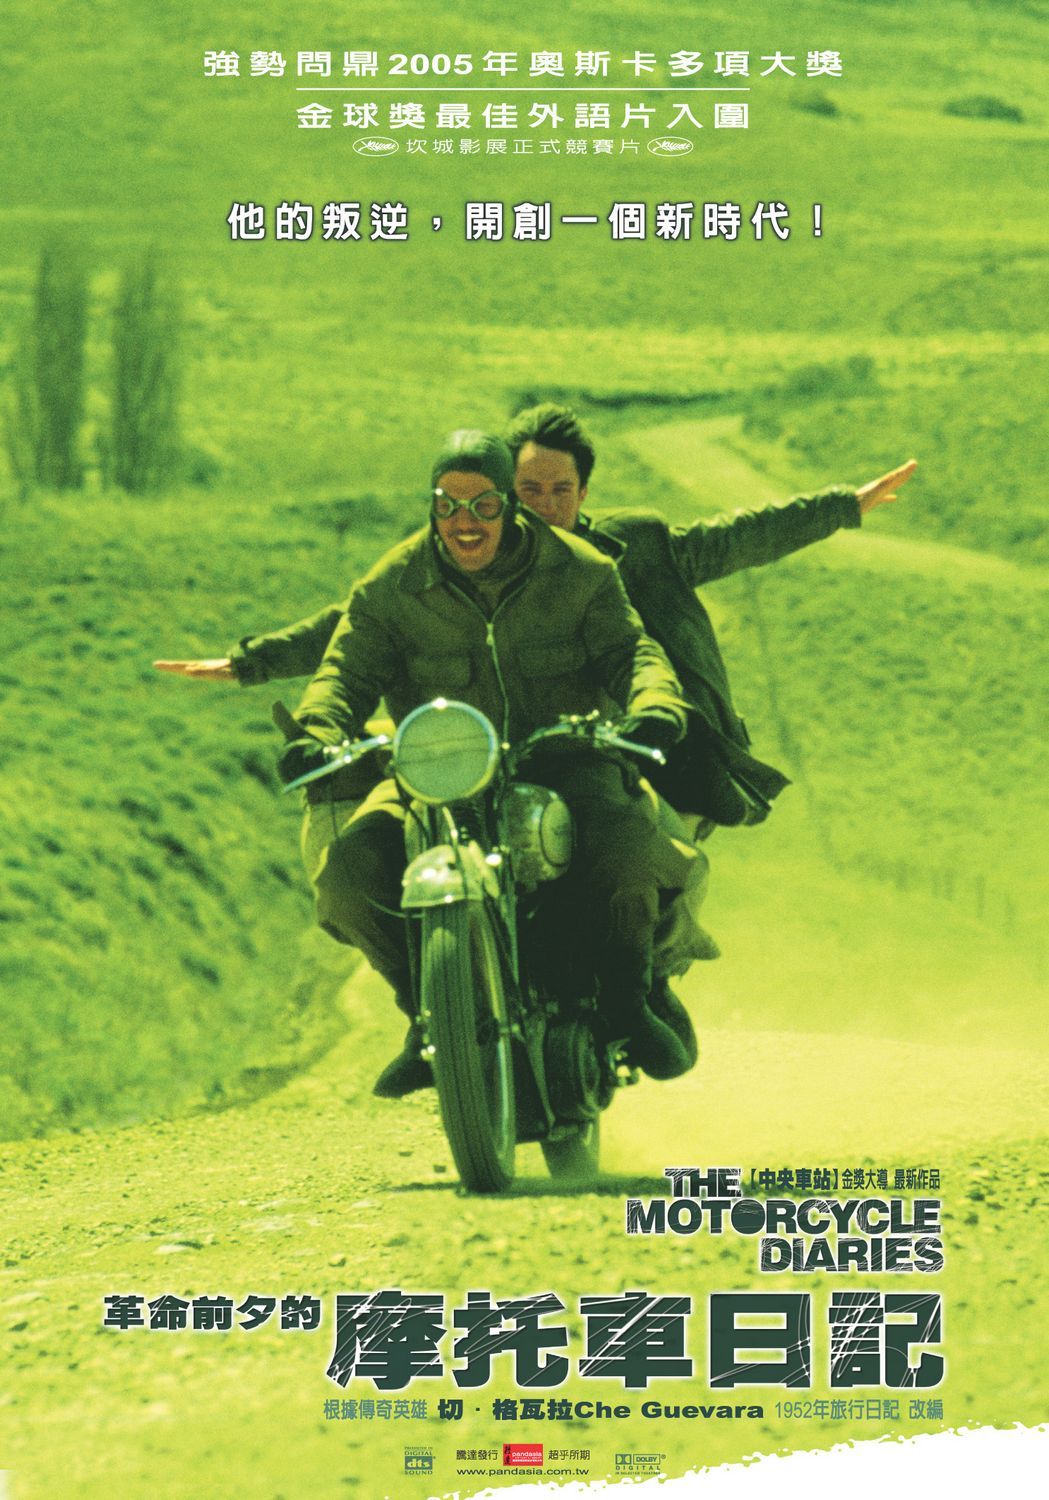 The Motorcycle Diaries (2004) Posters (3 of 5)